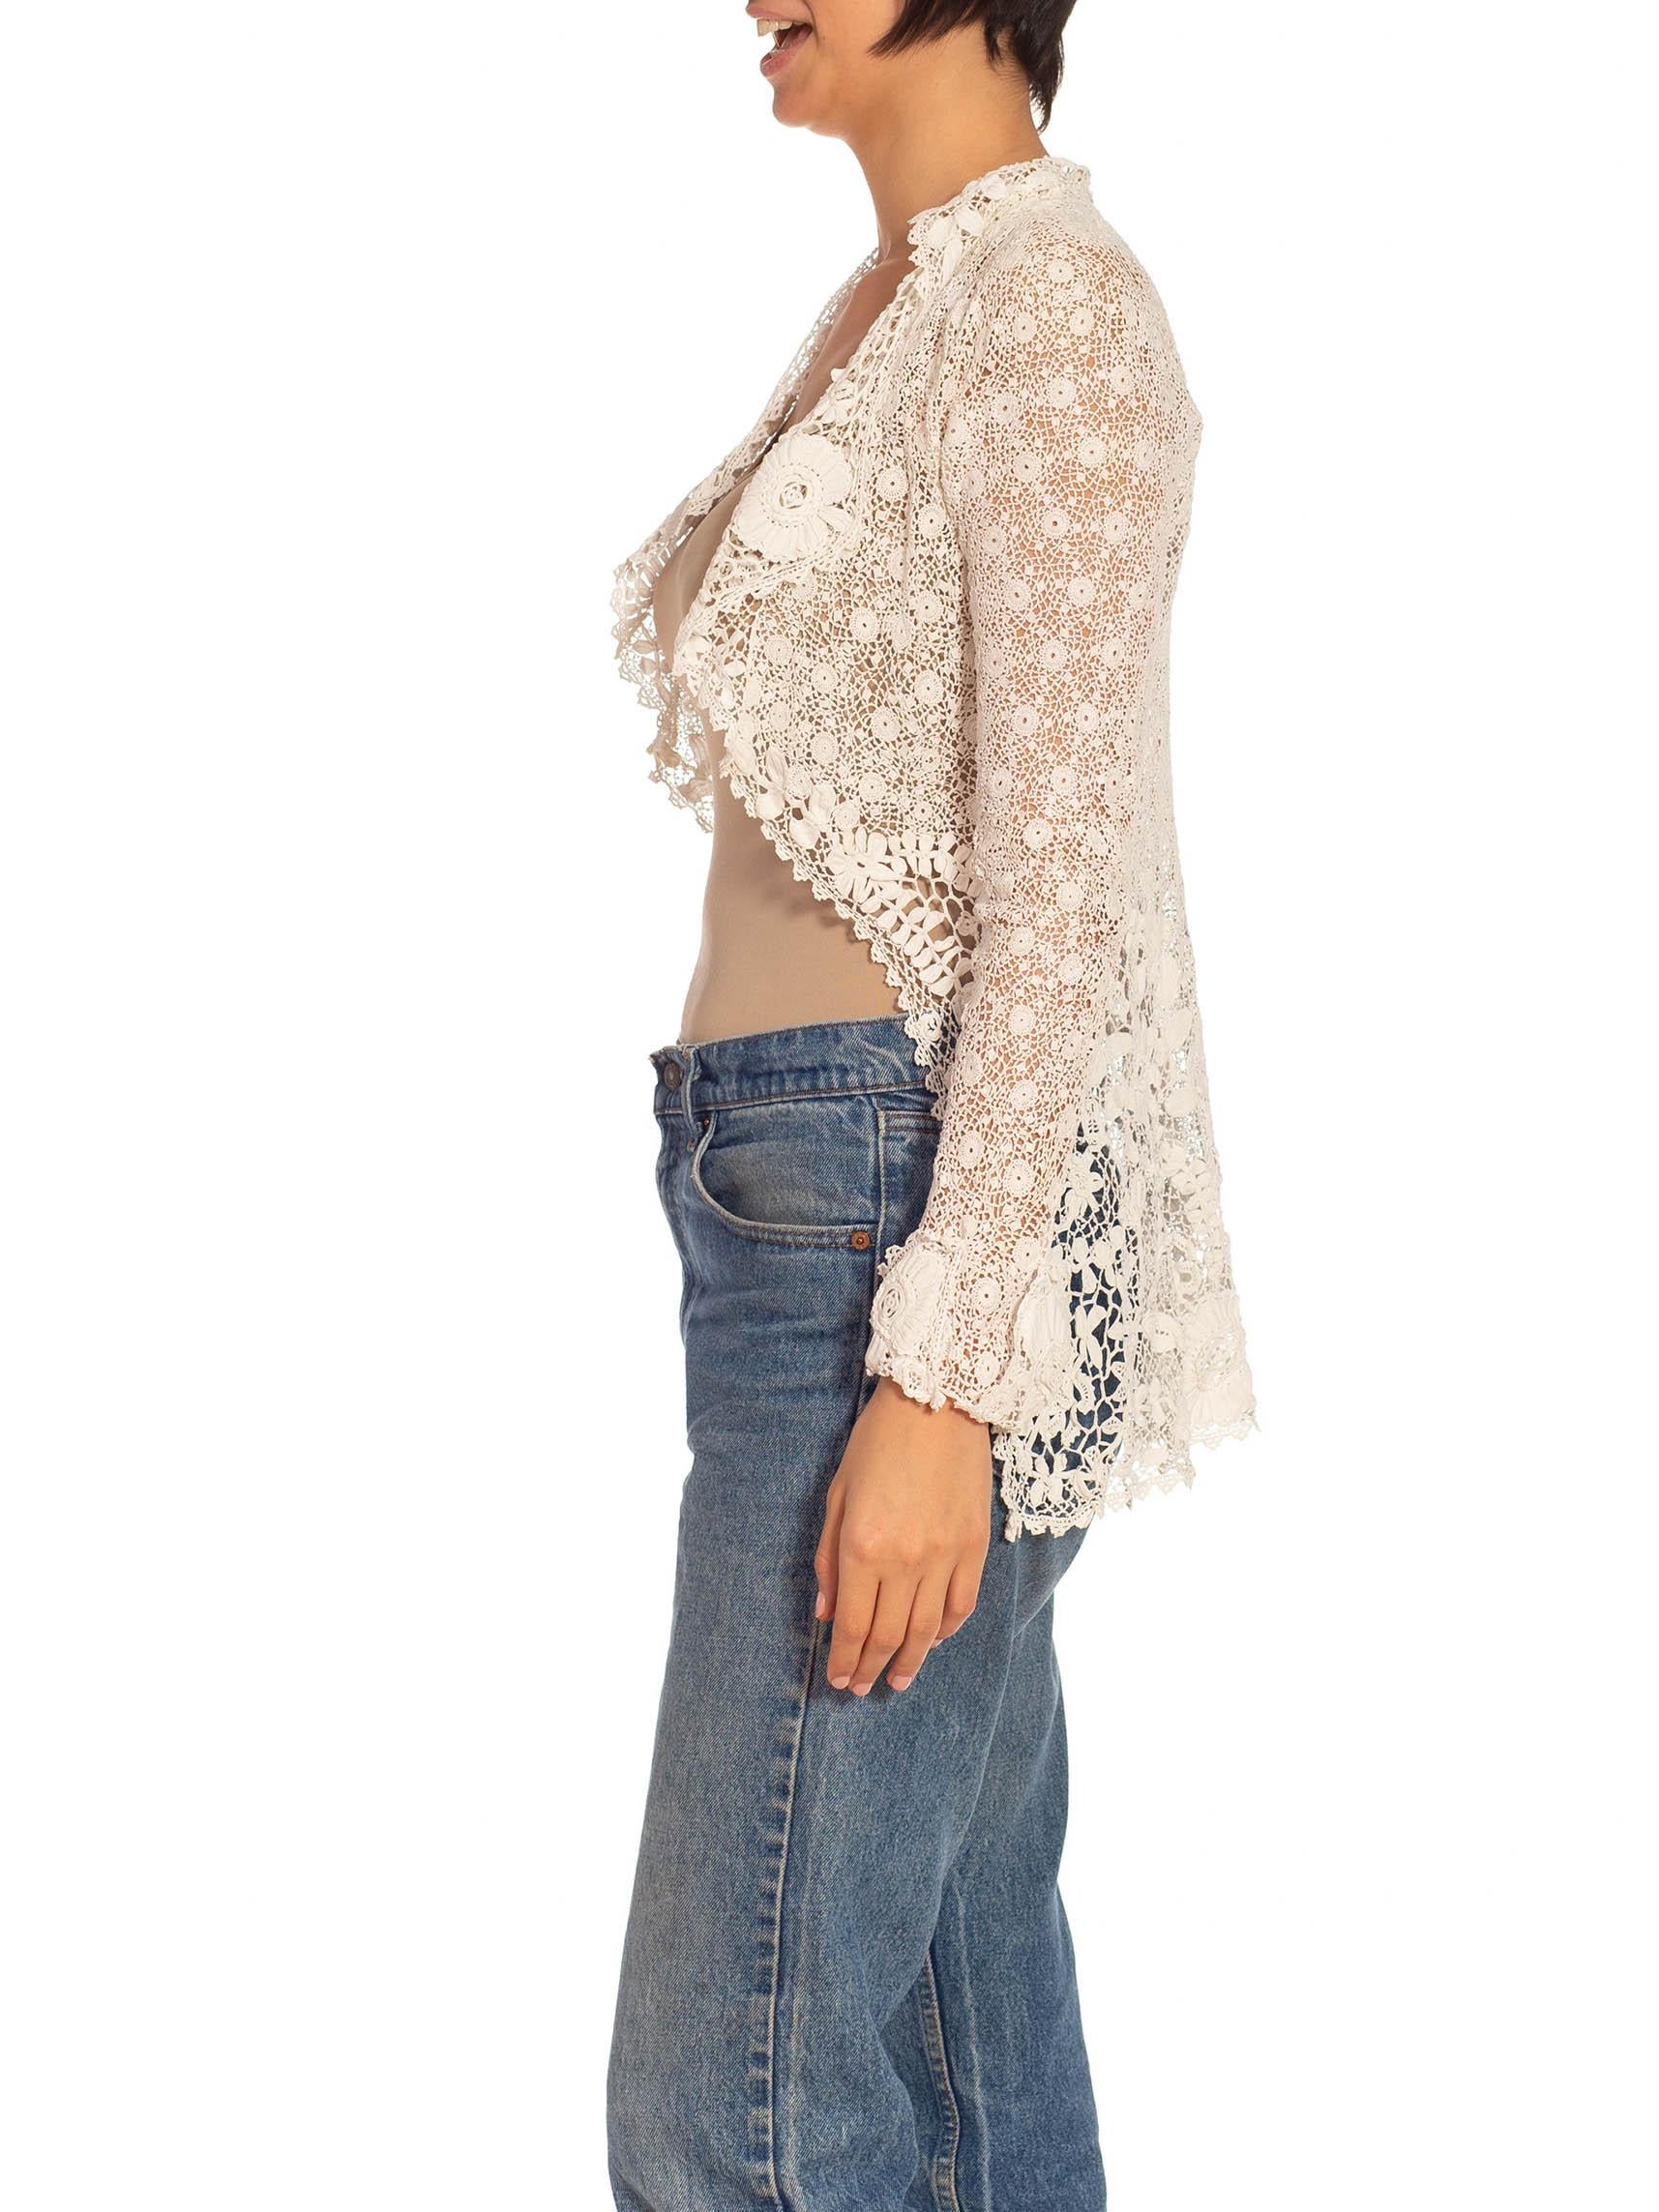 Women's Victorian White Irish Crochet Jacket With Long Sleeves For Sale